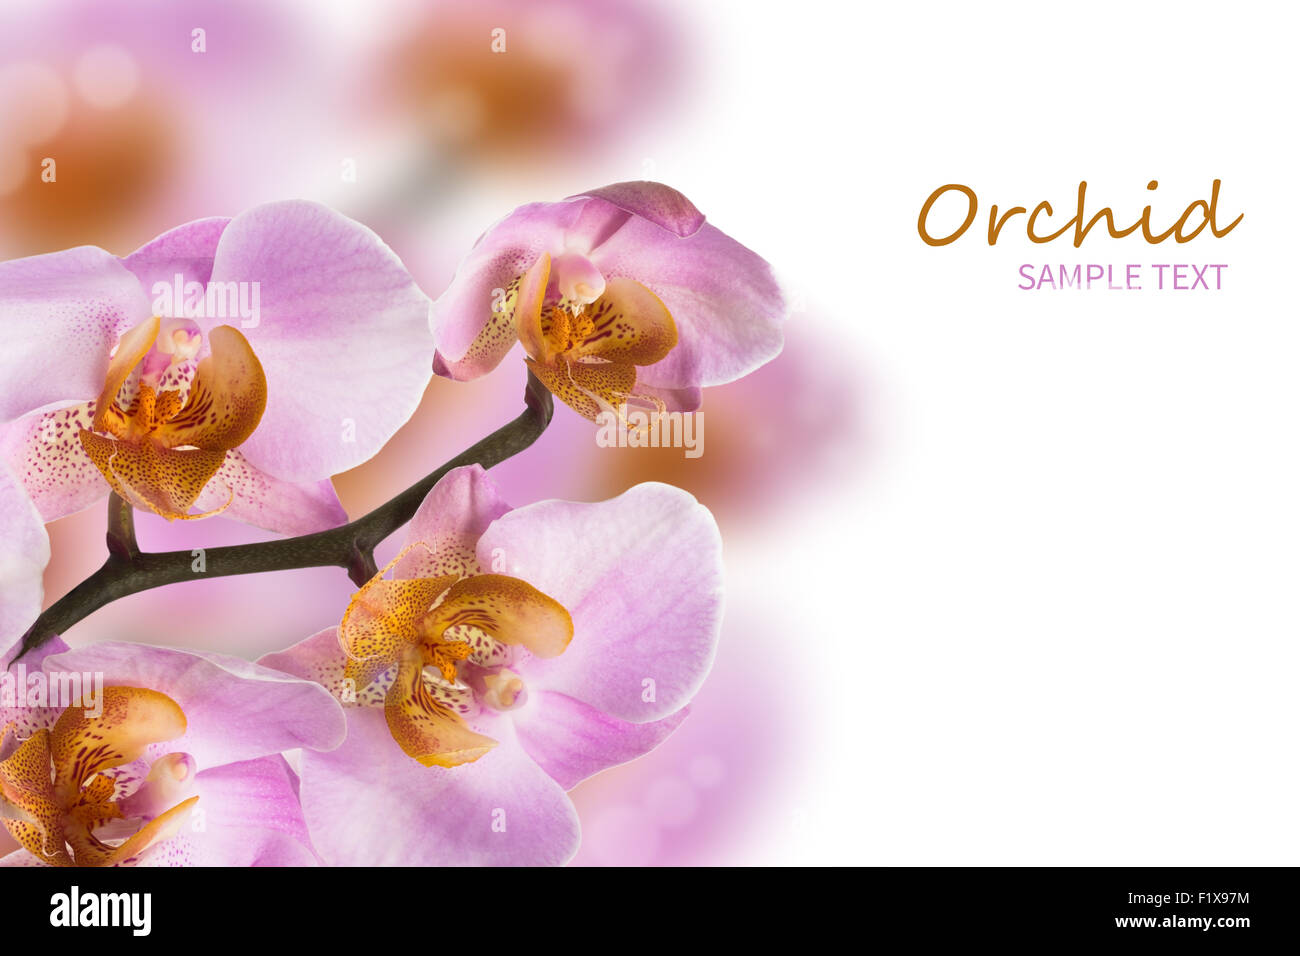 Pink orchid flowers on white background Stock Photo